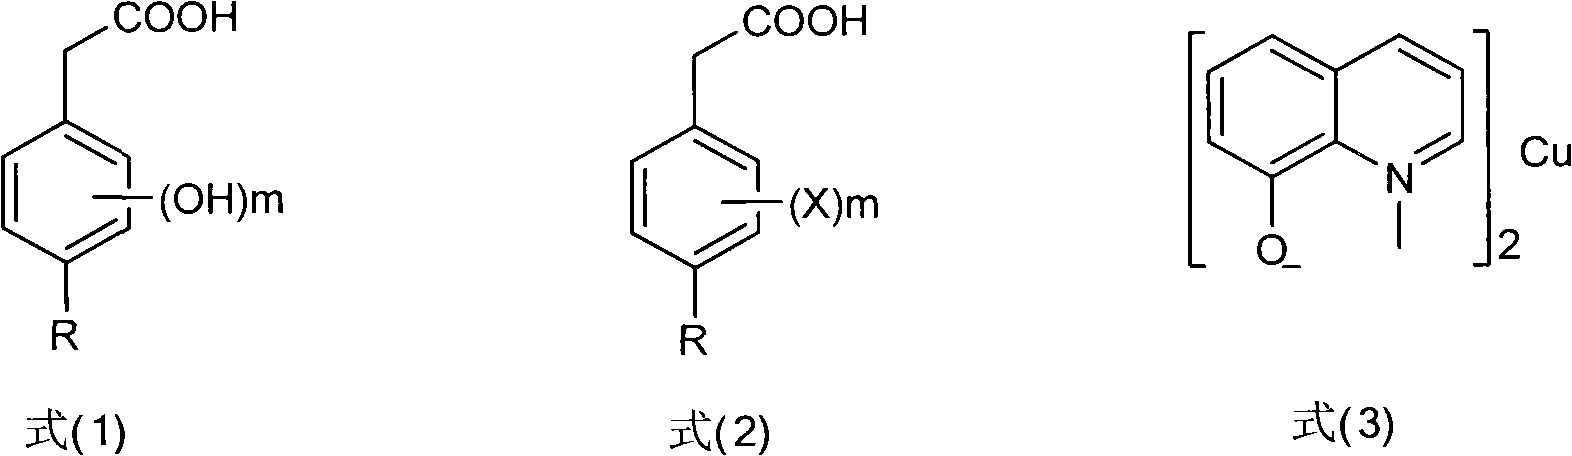 Method for preparing hydroxyl-substituted phenylacetic acid compound